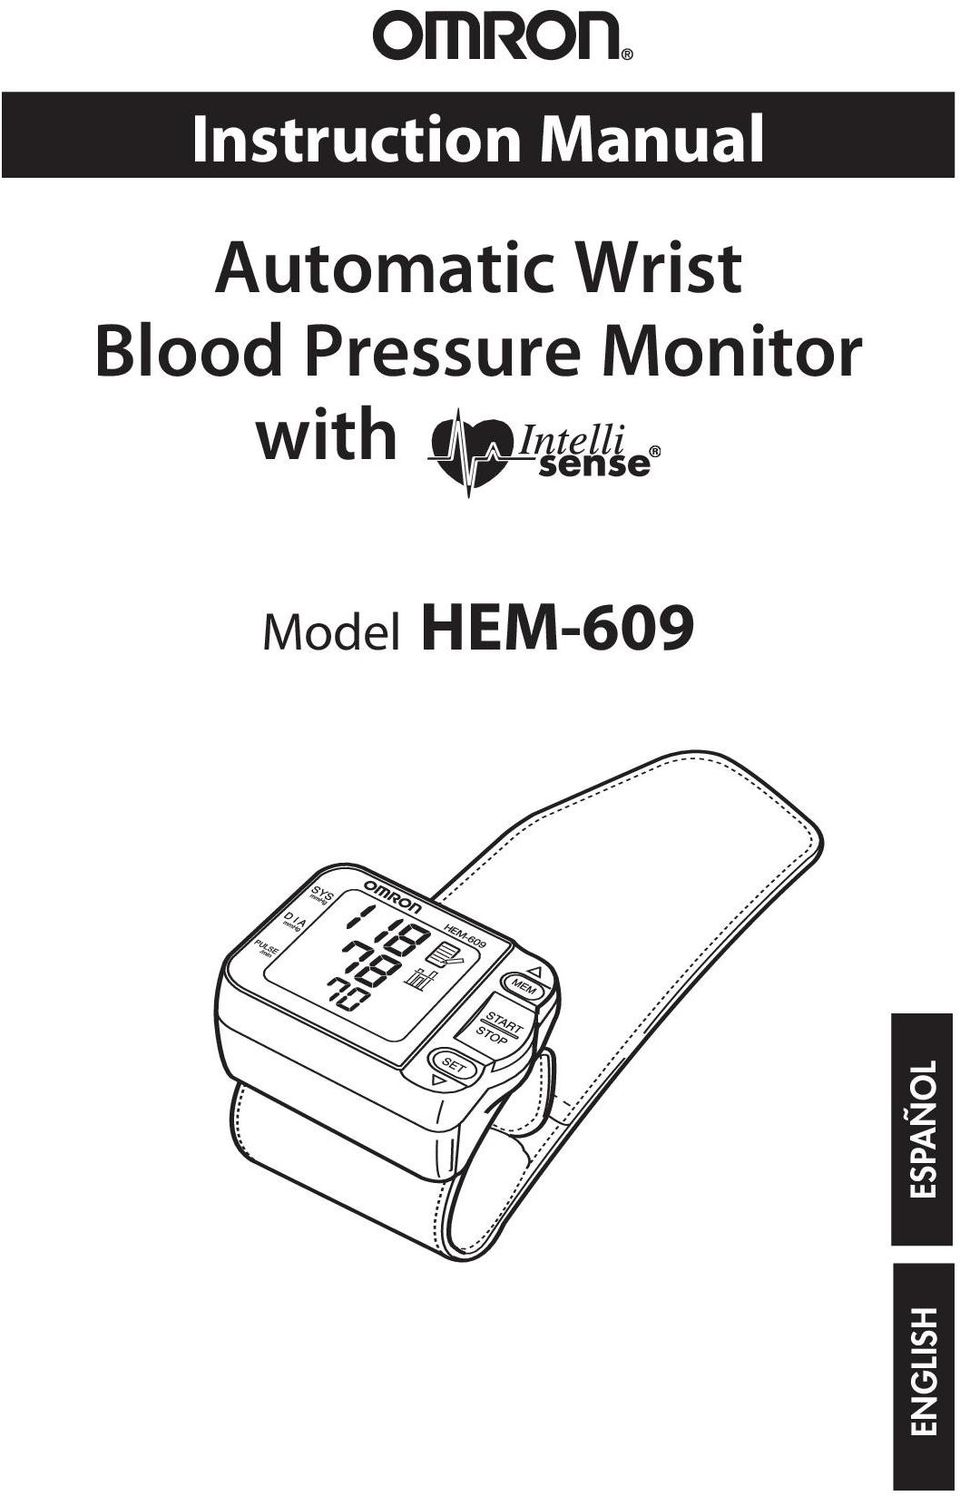 Pressure Monitor with